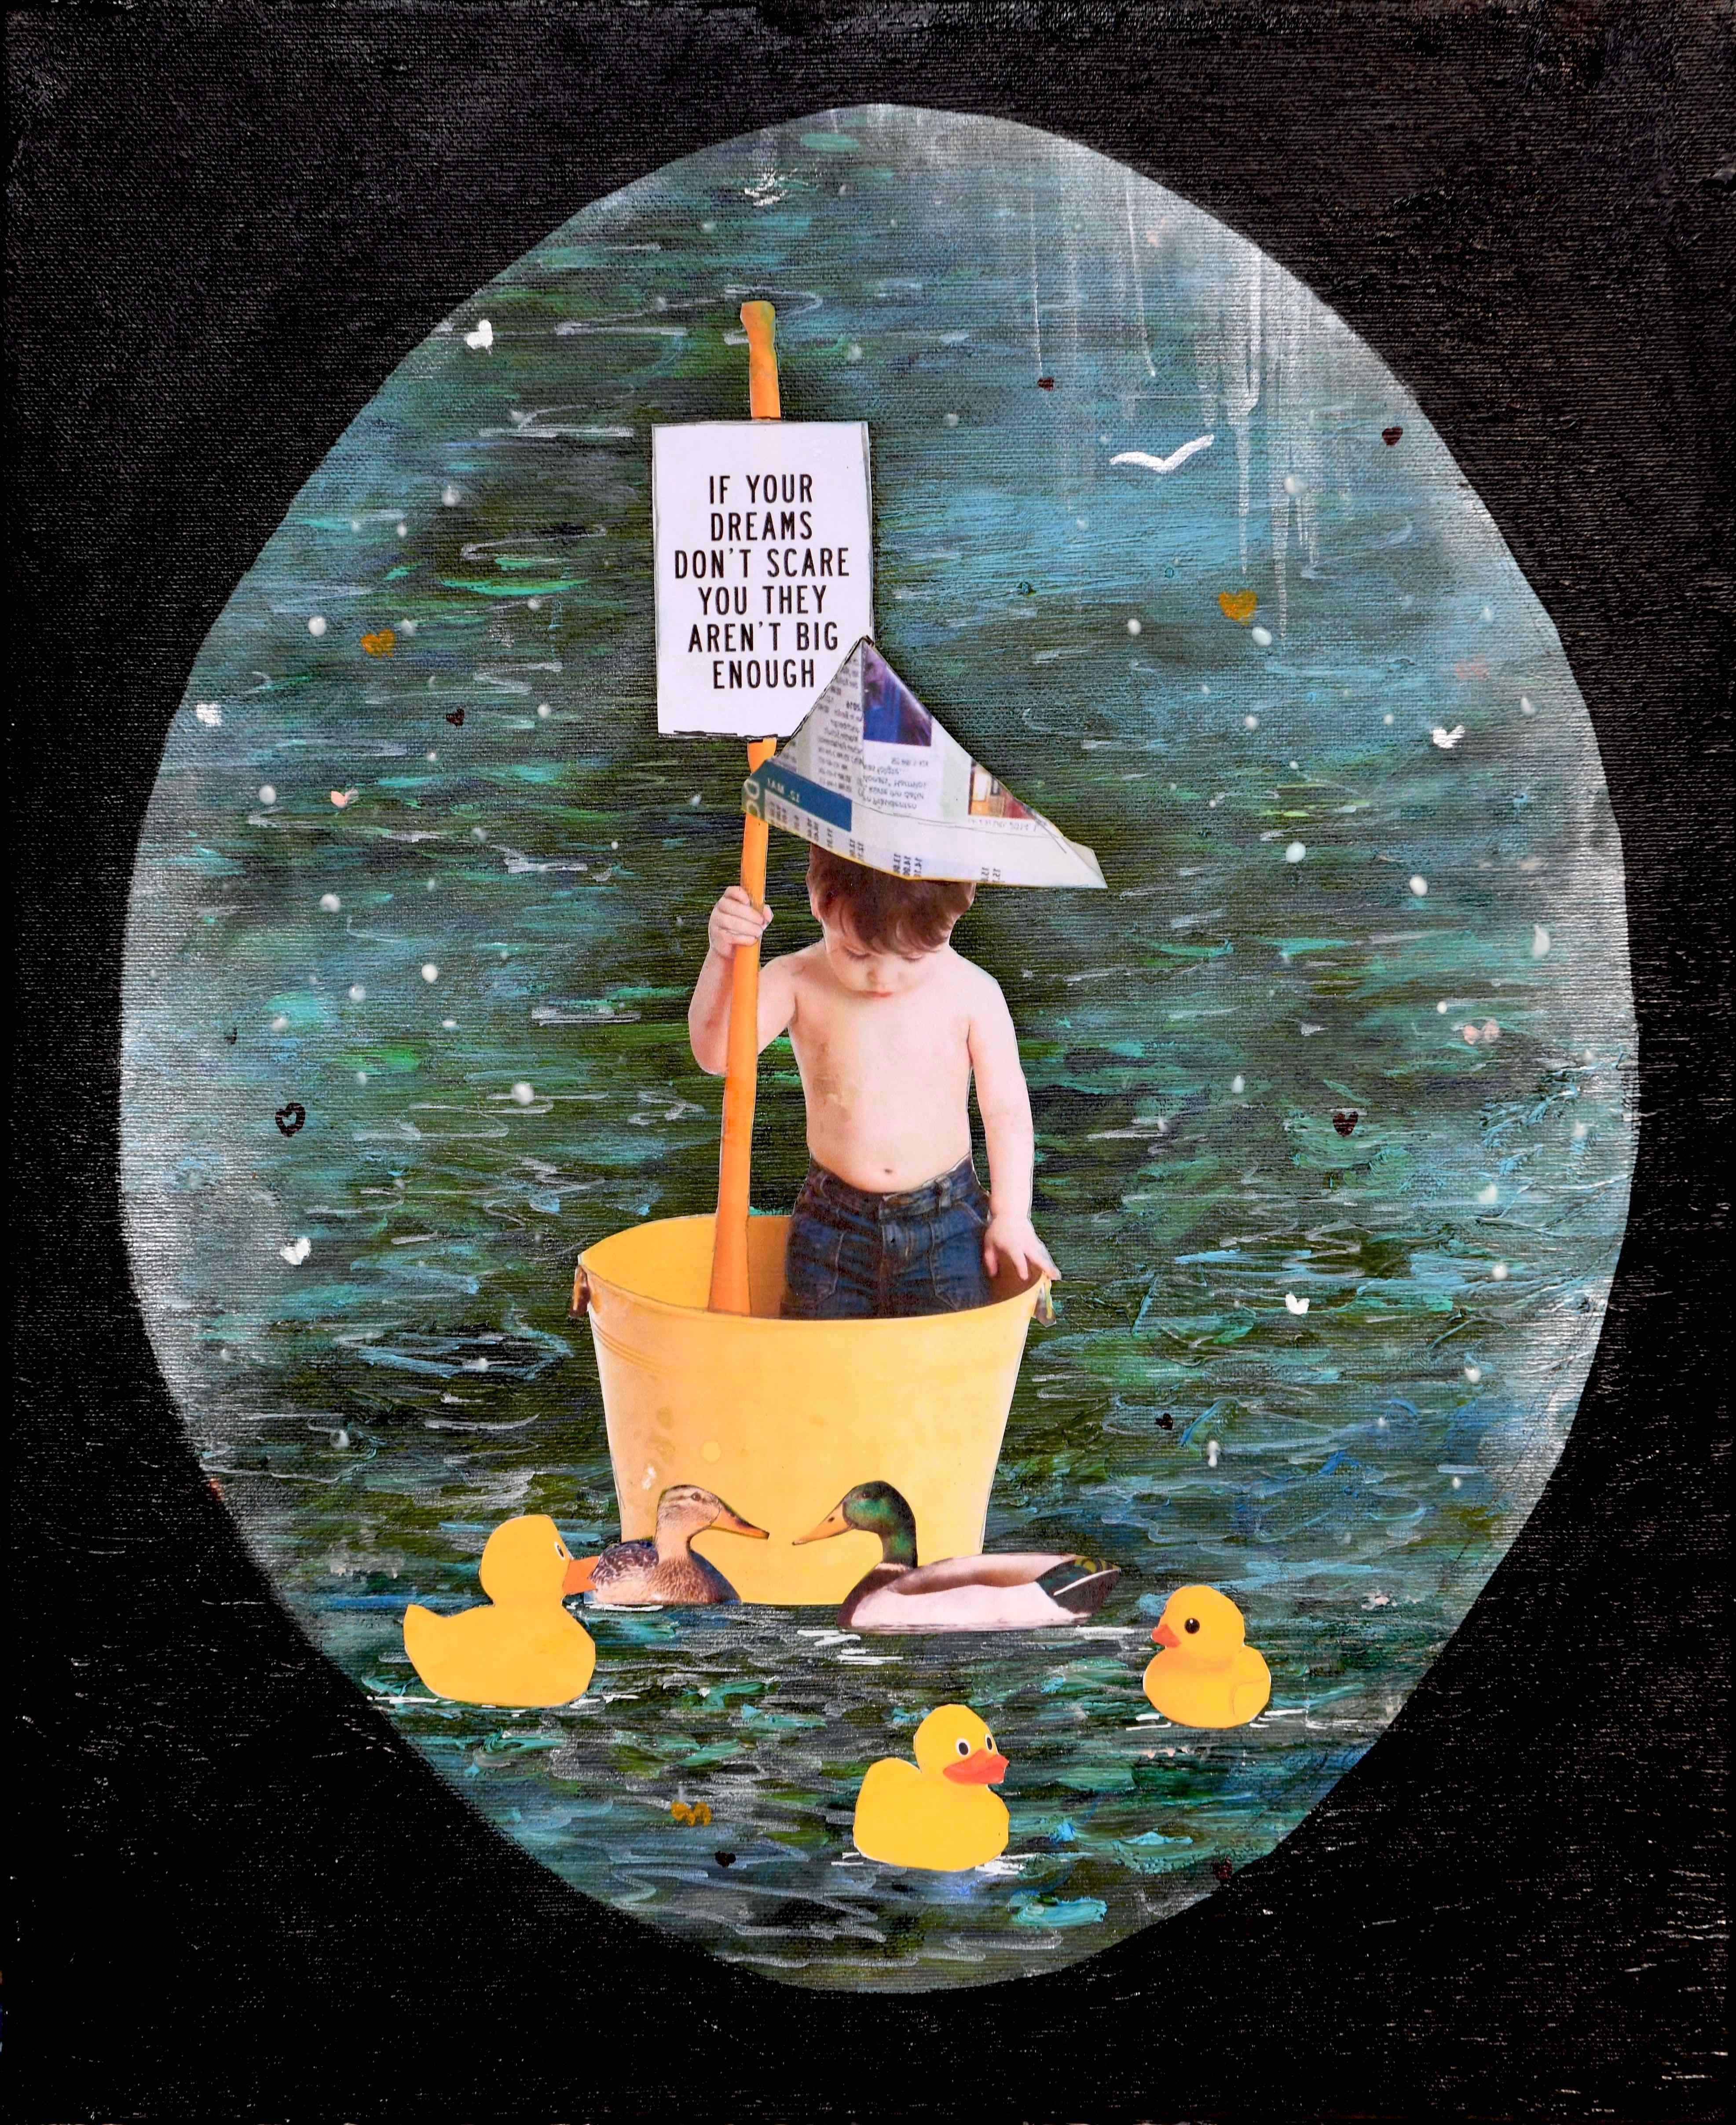 The Size Of Dreams - Little Boy, Real & Rubber Ducks, Dreaming Big, Glow in Dark - Painting by Veronica Green